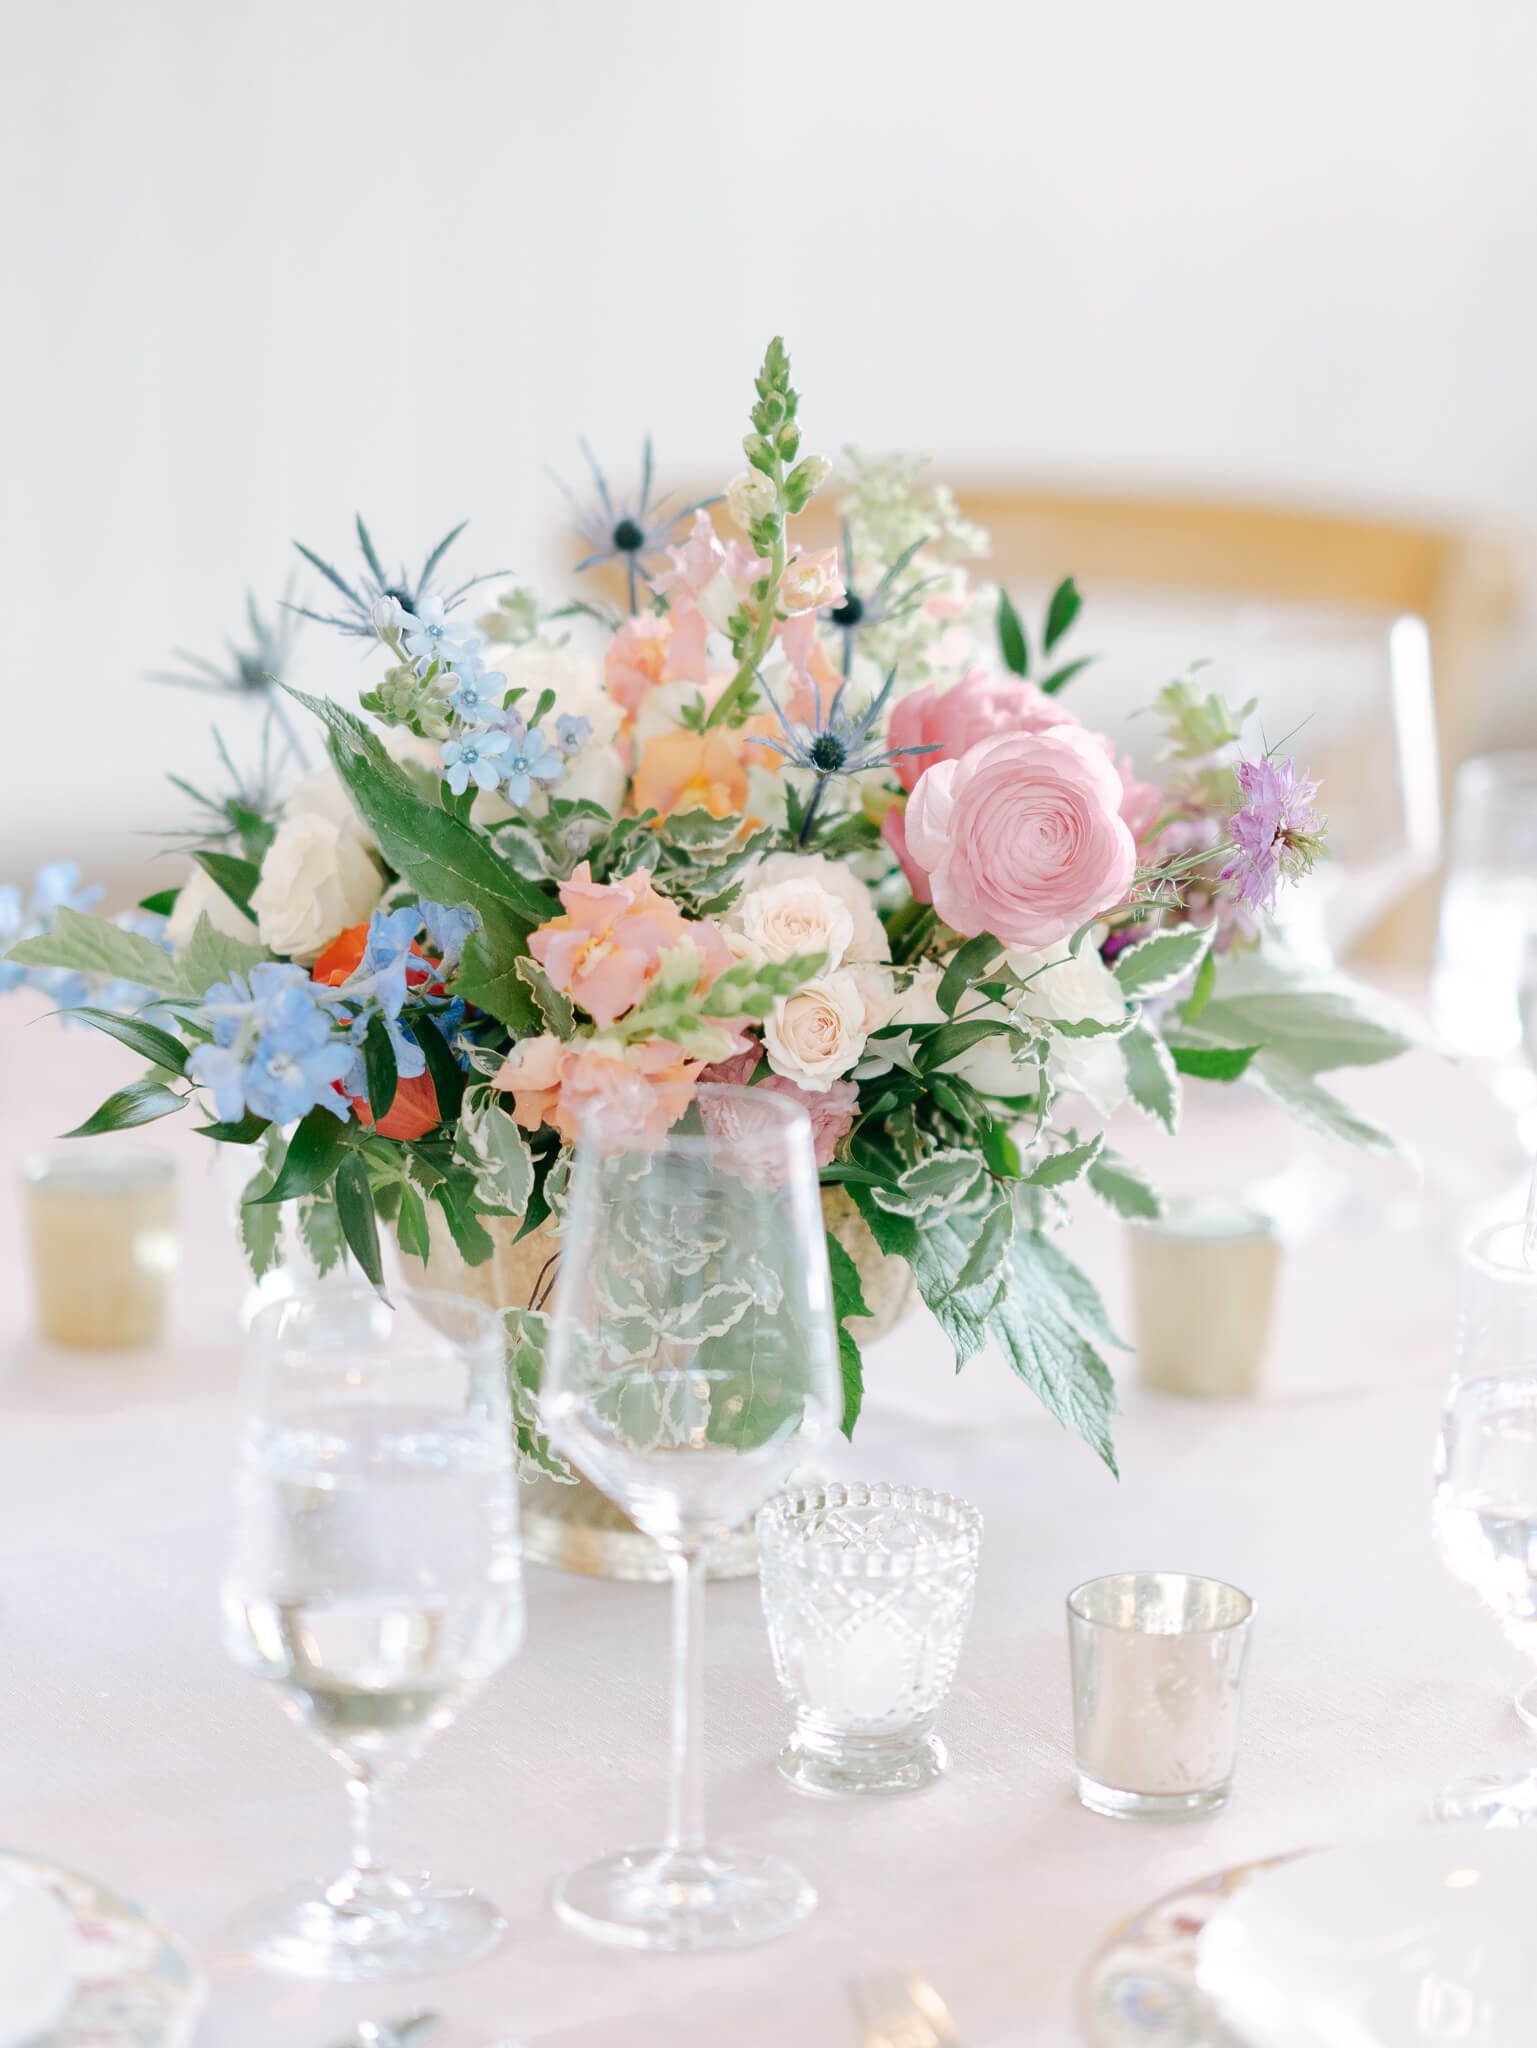 Closeup of a colorful floral centerpiece and clear glasses on a blush table cloth at a wedding reception.